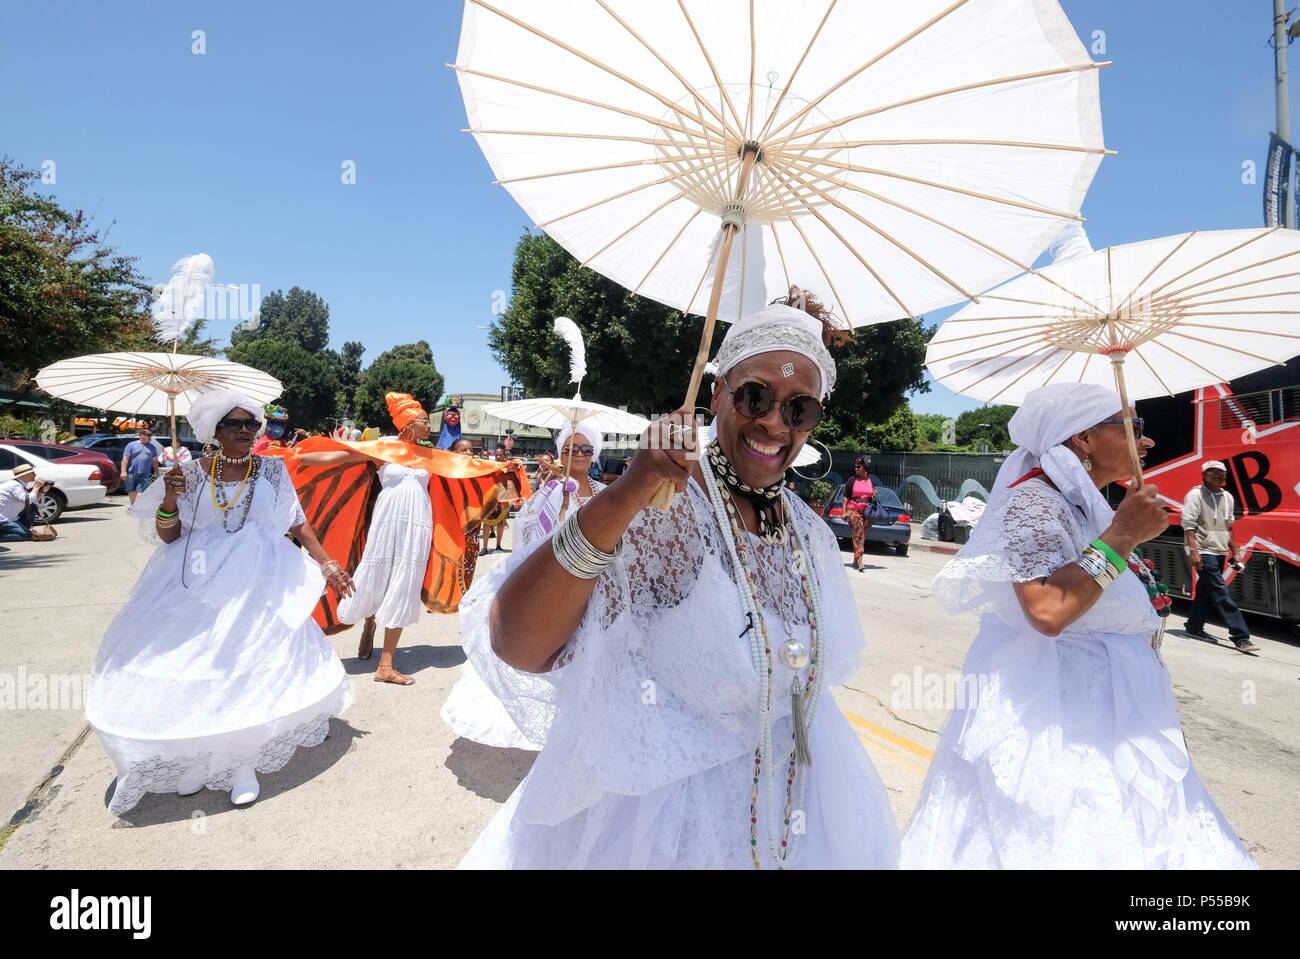 Los Angeles, USA. 24th June, 2018. People march at the 8th annual Day of the Ancestors: Festival of Masks in Los Angeles, the United States on June 24, 2018. Credit: Zhao Hanrong/Xinhua/Alamy Live News Stock Photo